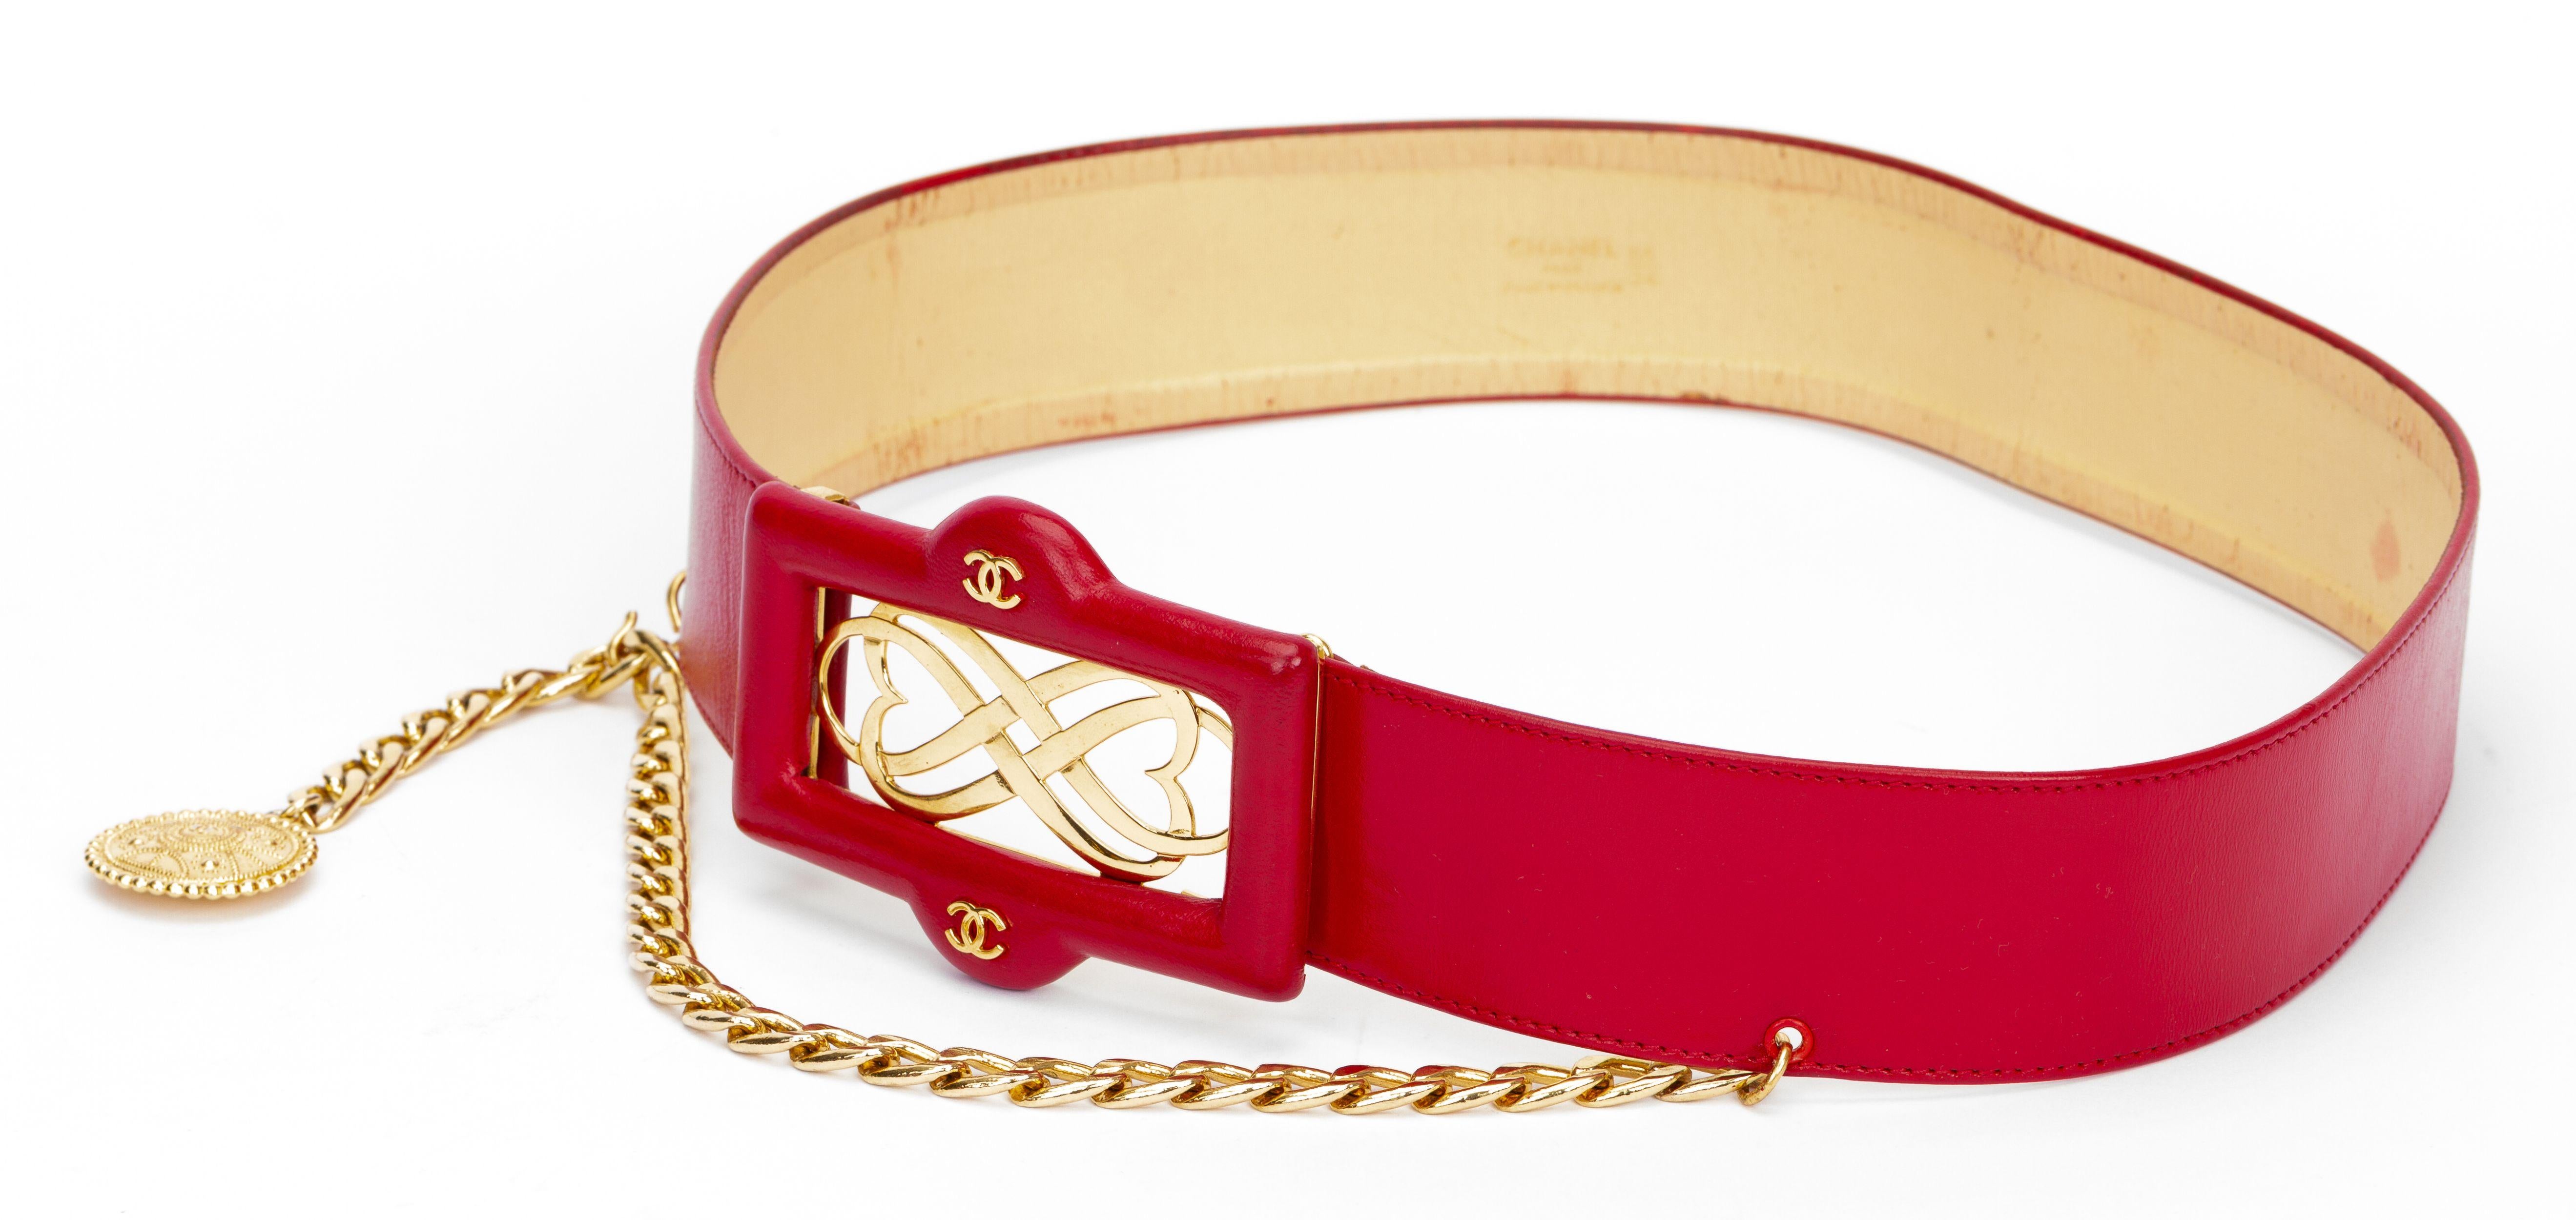 Chanel excellent condition 80s red leather belt with logo buckle, chain drop with coin. Rare large size 85cm/34”. Chain length 15